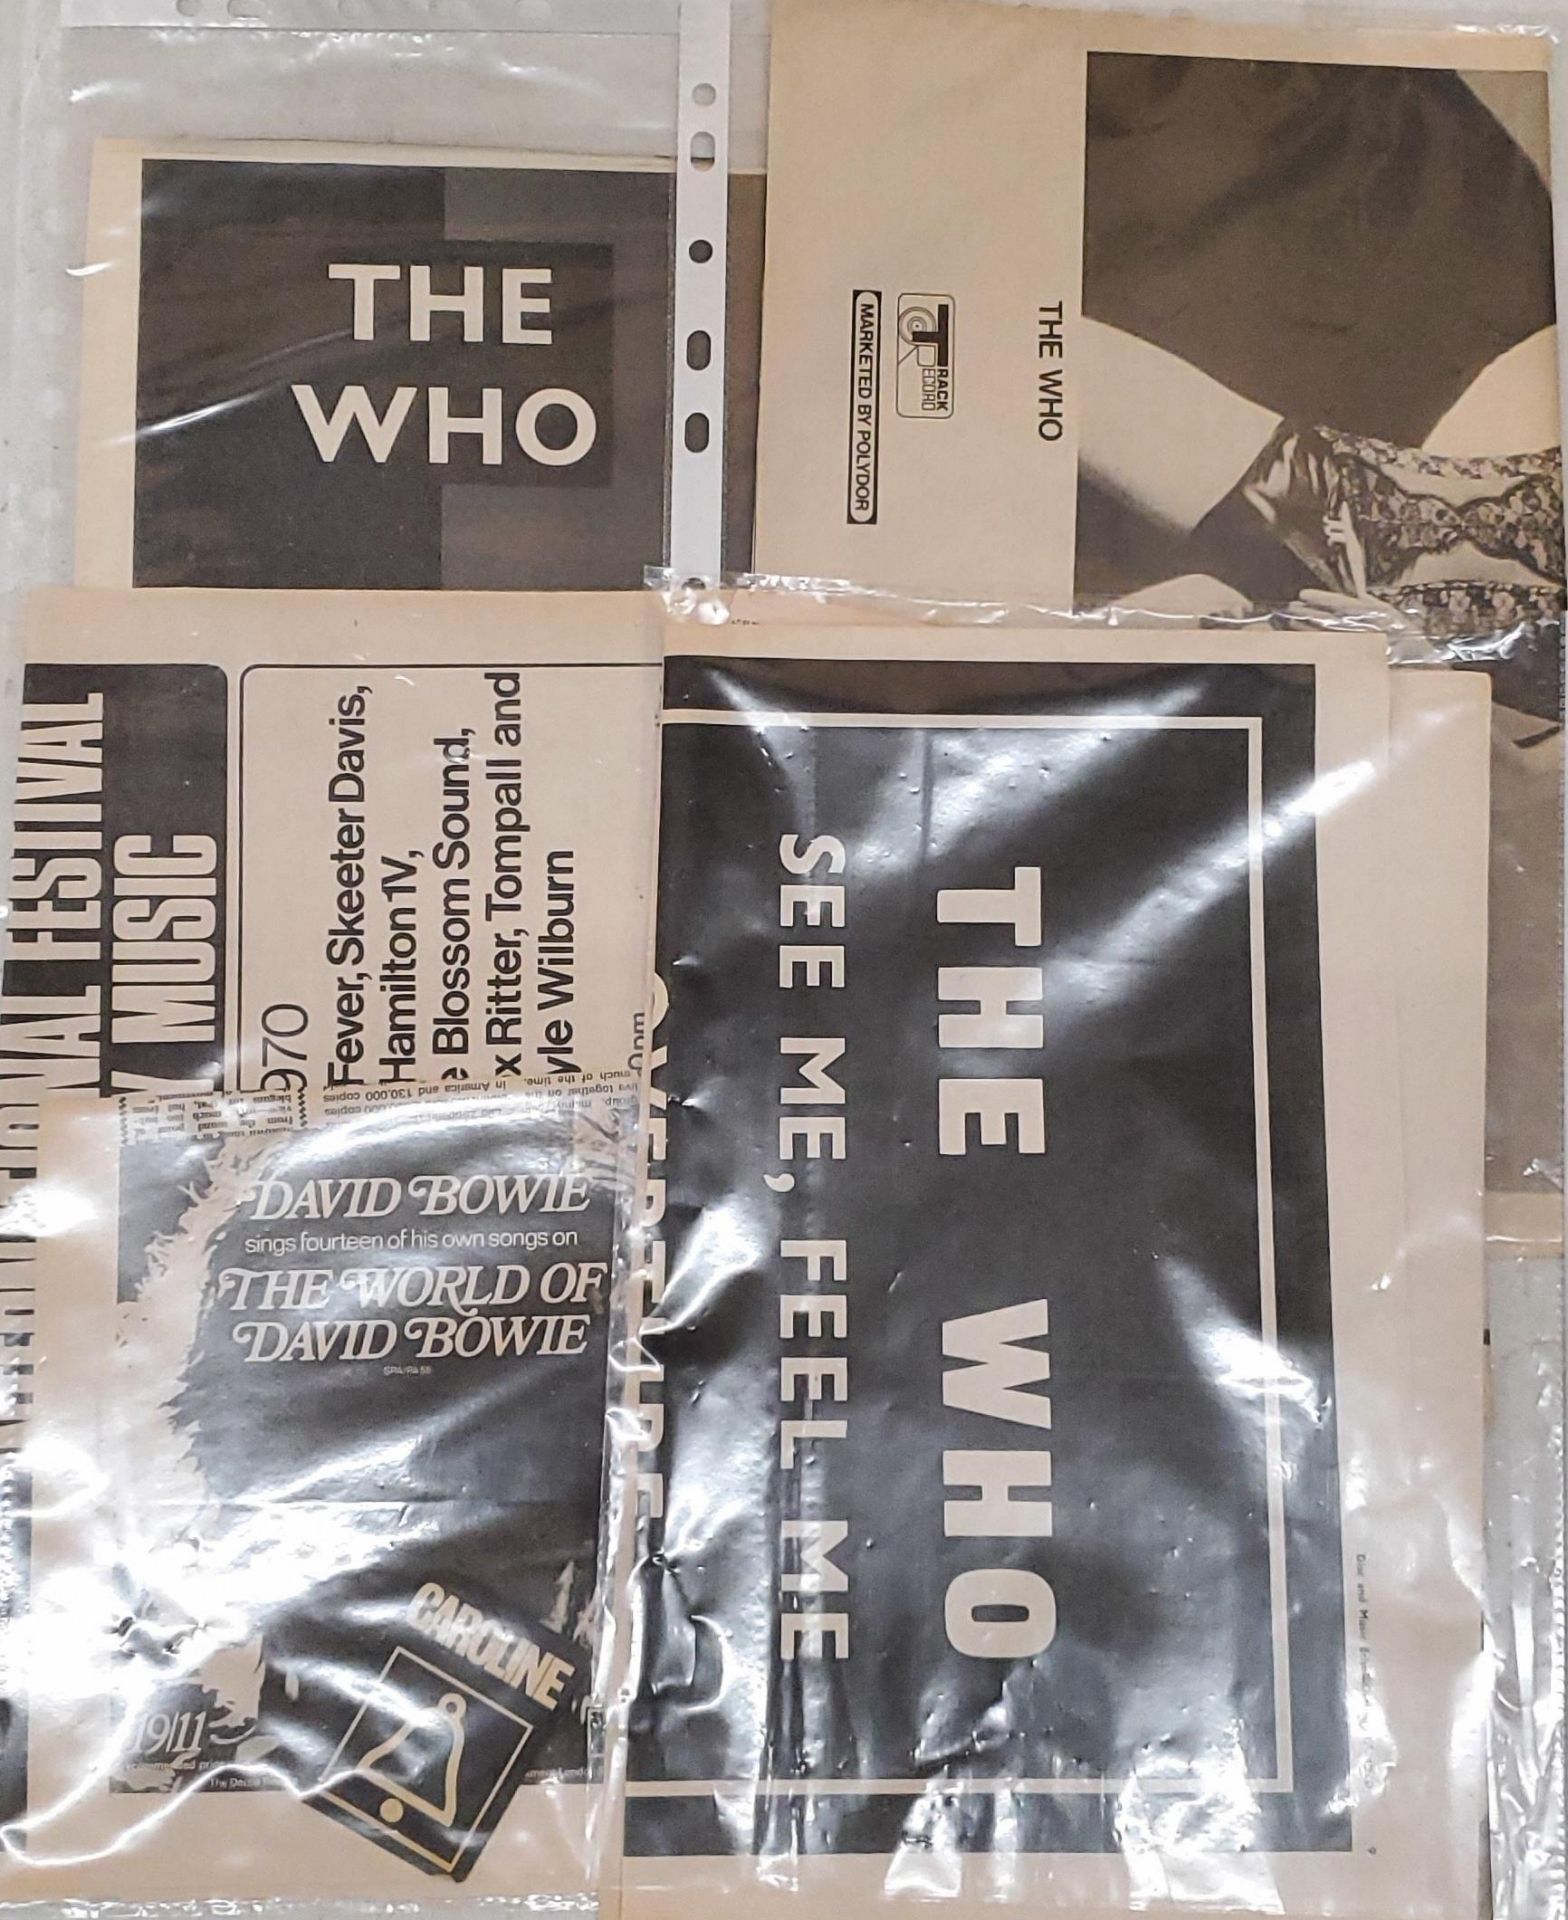 A GROUP OF MUSIC RELATED NEWSPAPER ENTRIES, DAVID BOWIE, THE WHO